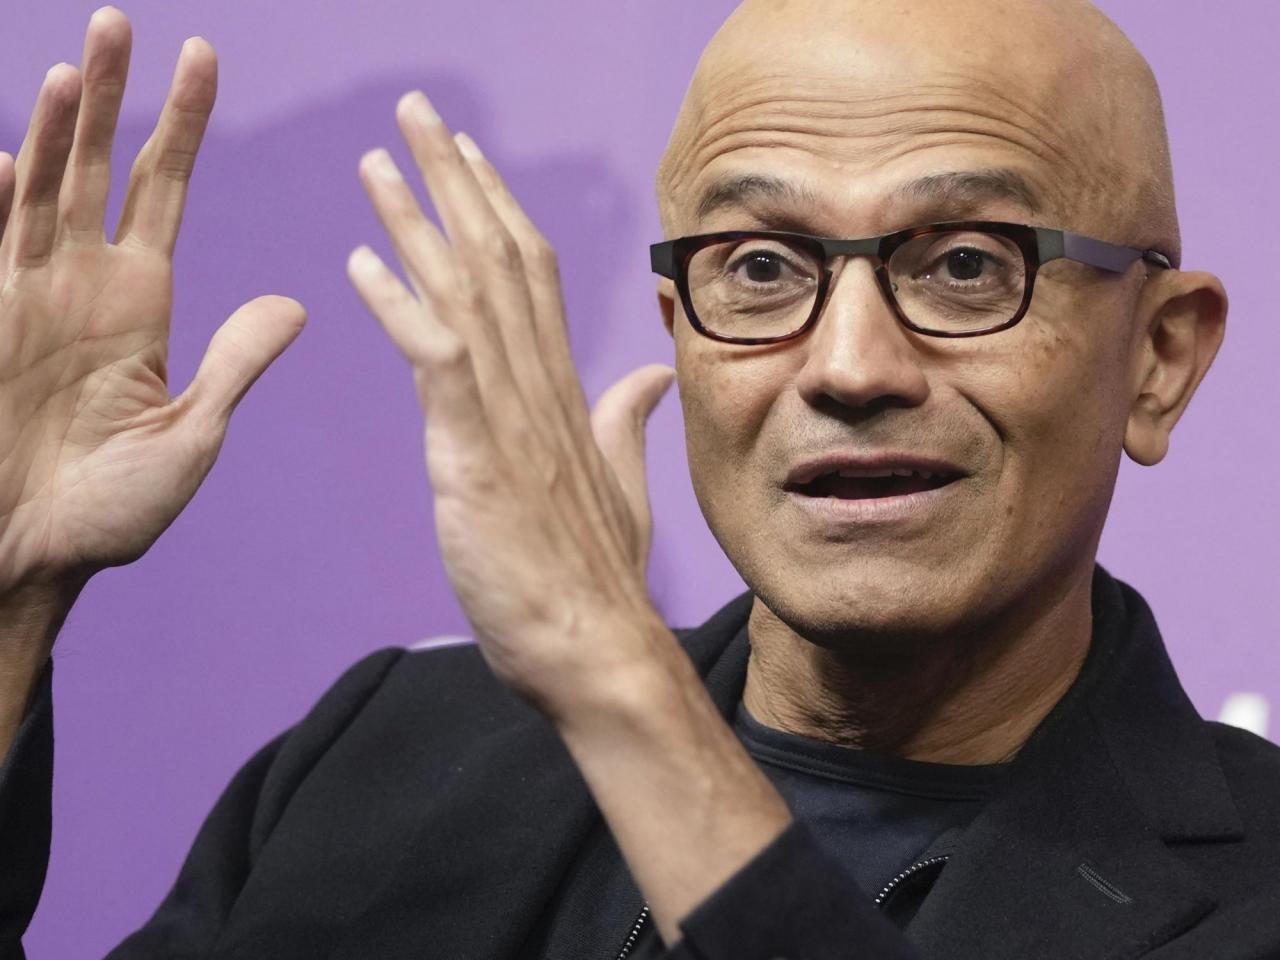 Nadella, CEO of Microsoft, is appealing to Indian developers to use the company's artificial intelligence tools.